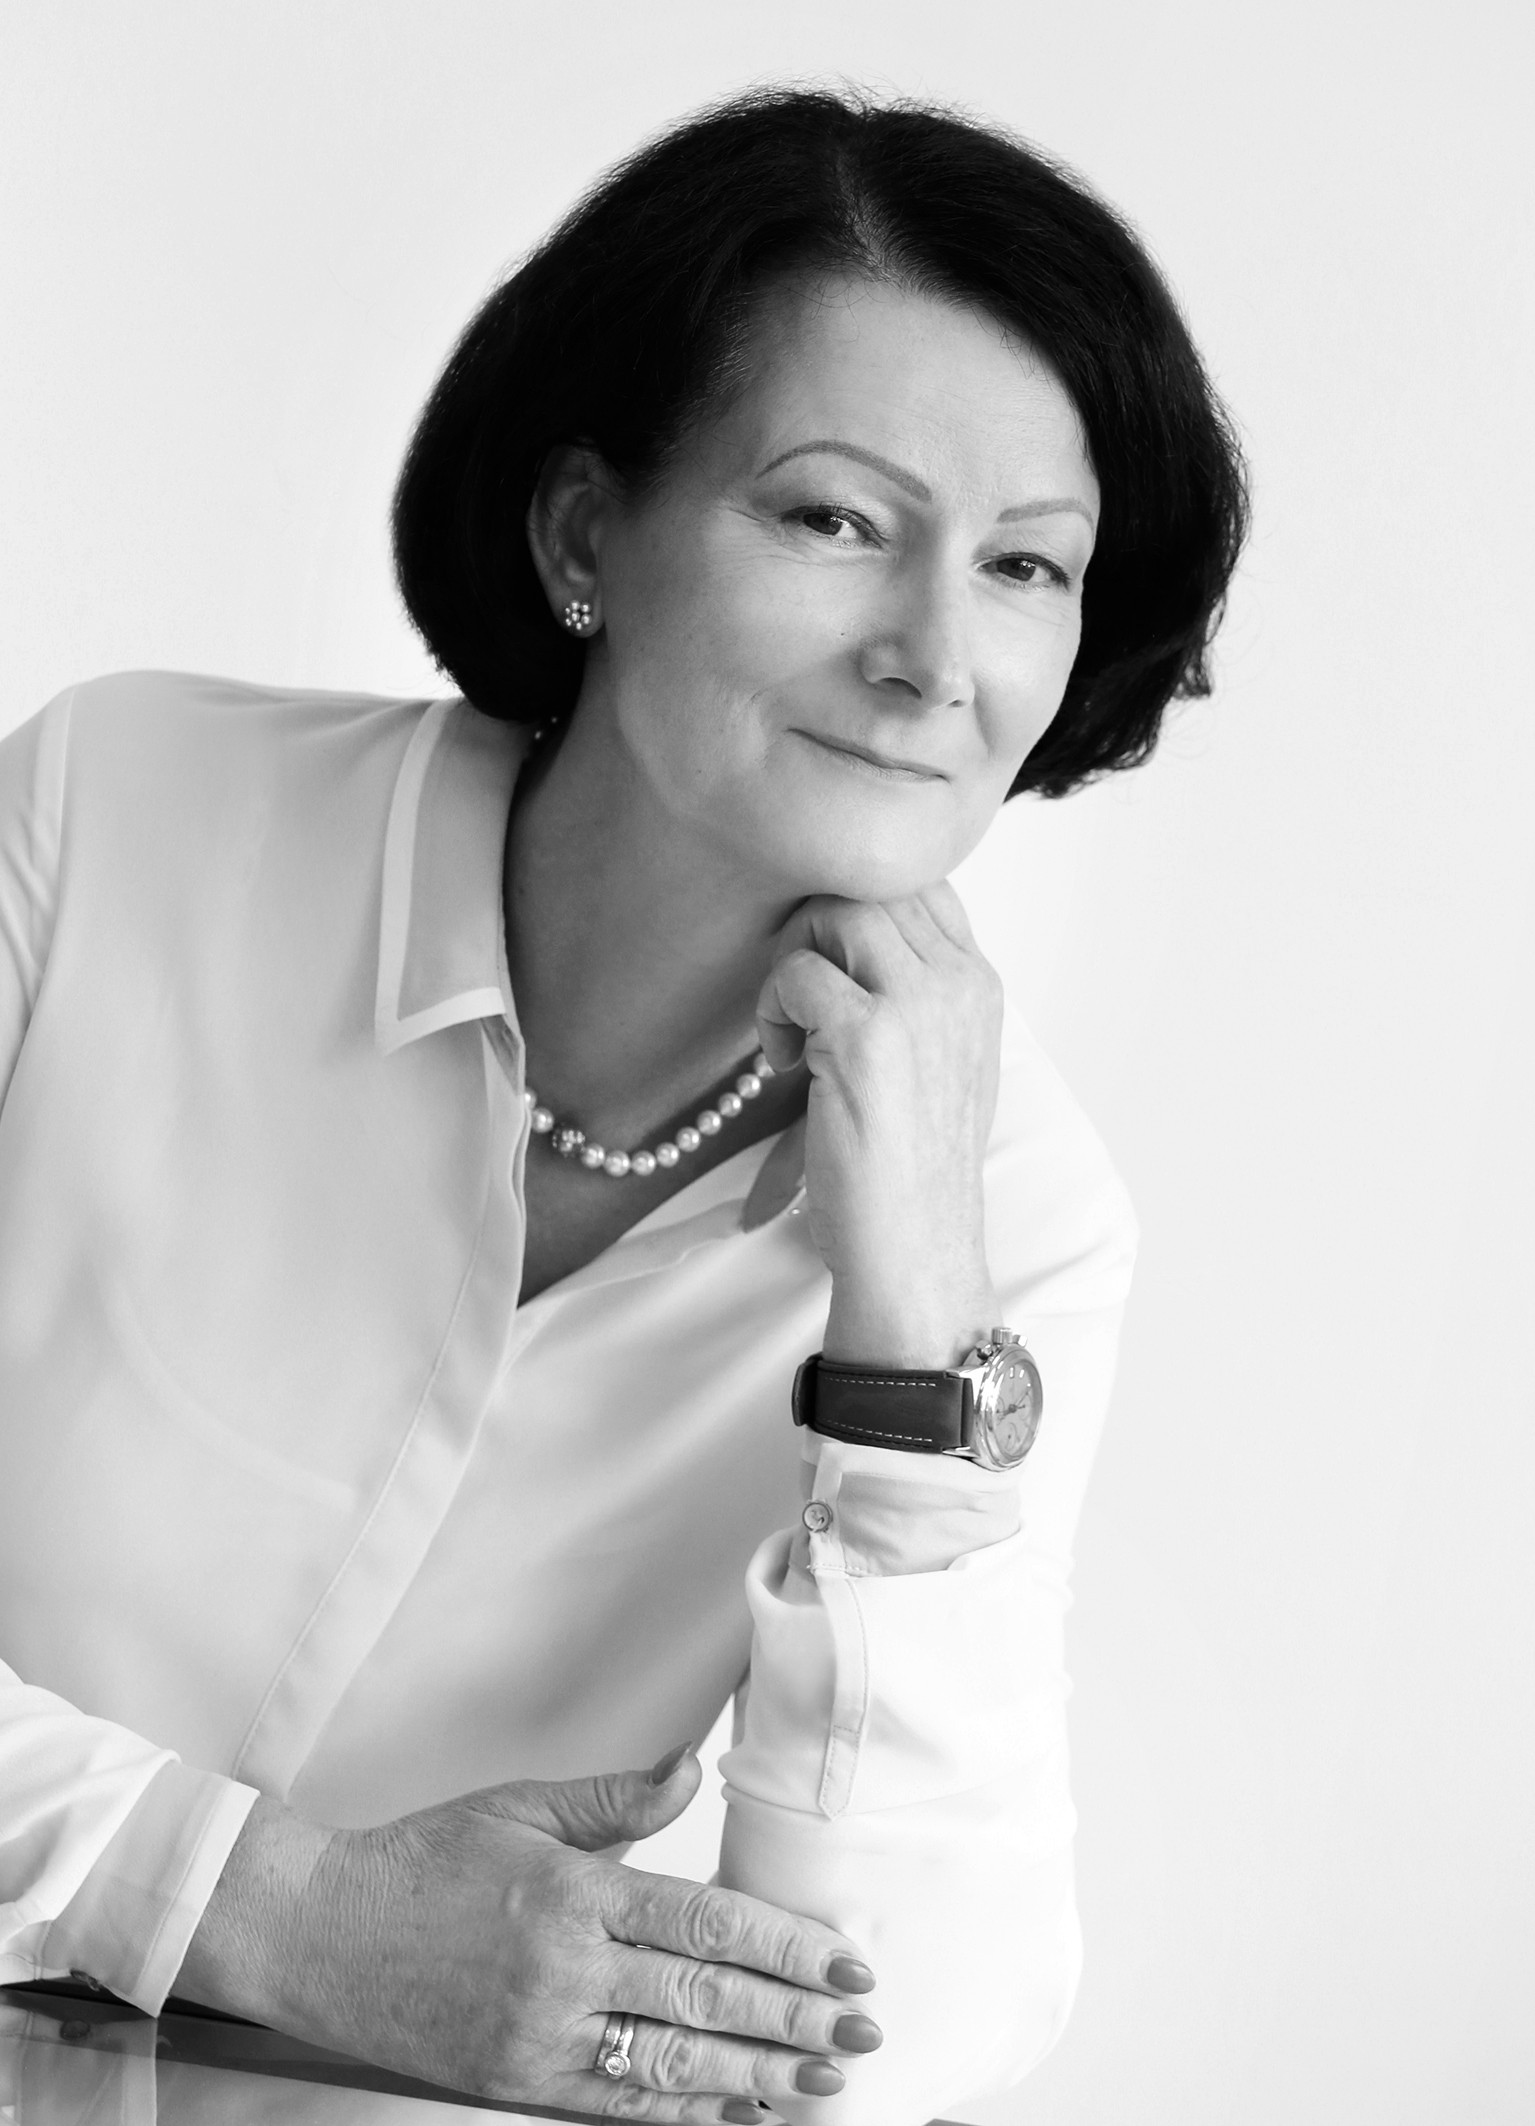 Petra Damasko, founder and CEO